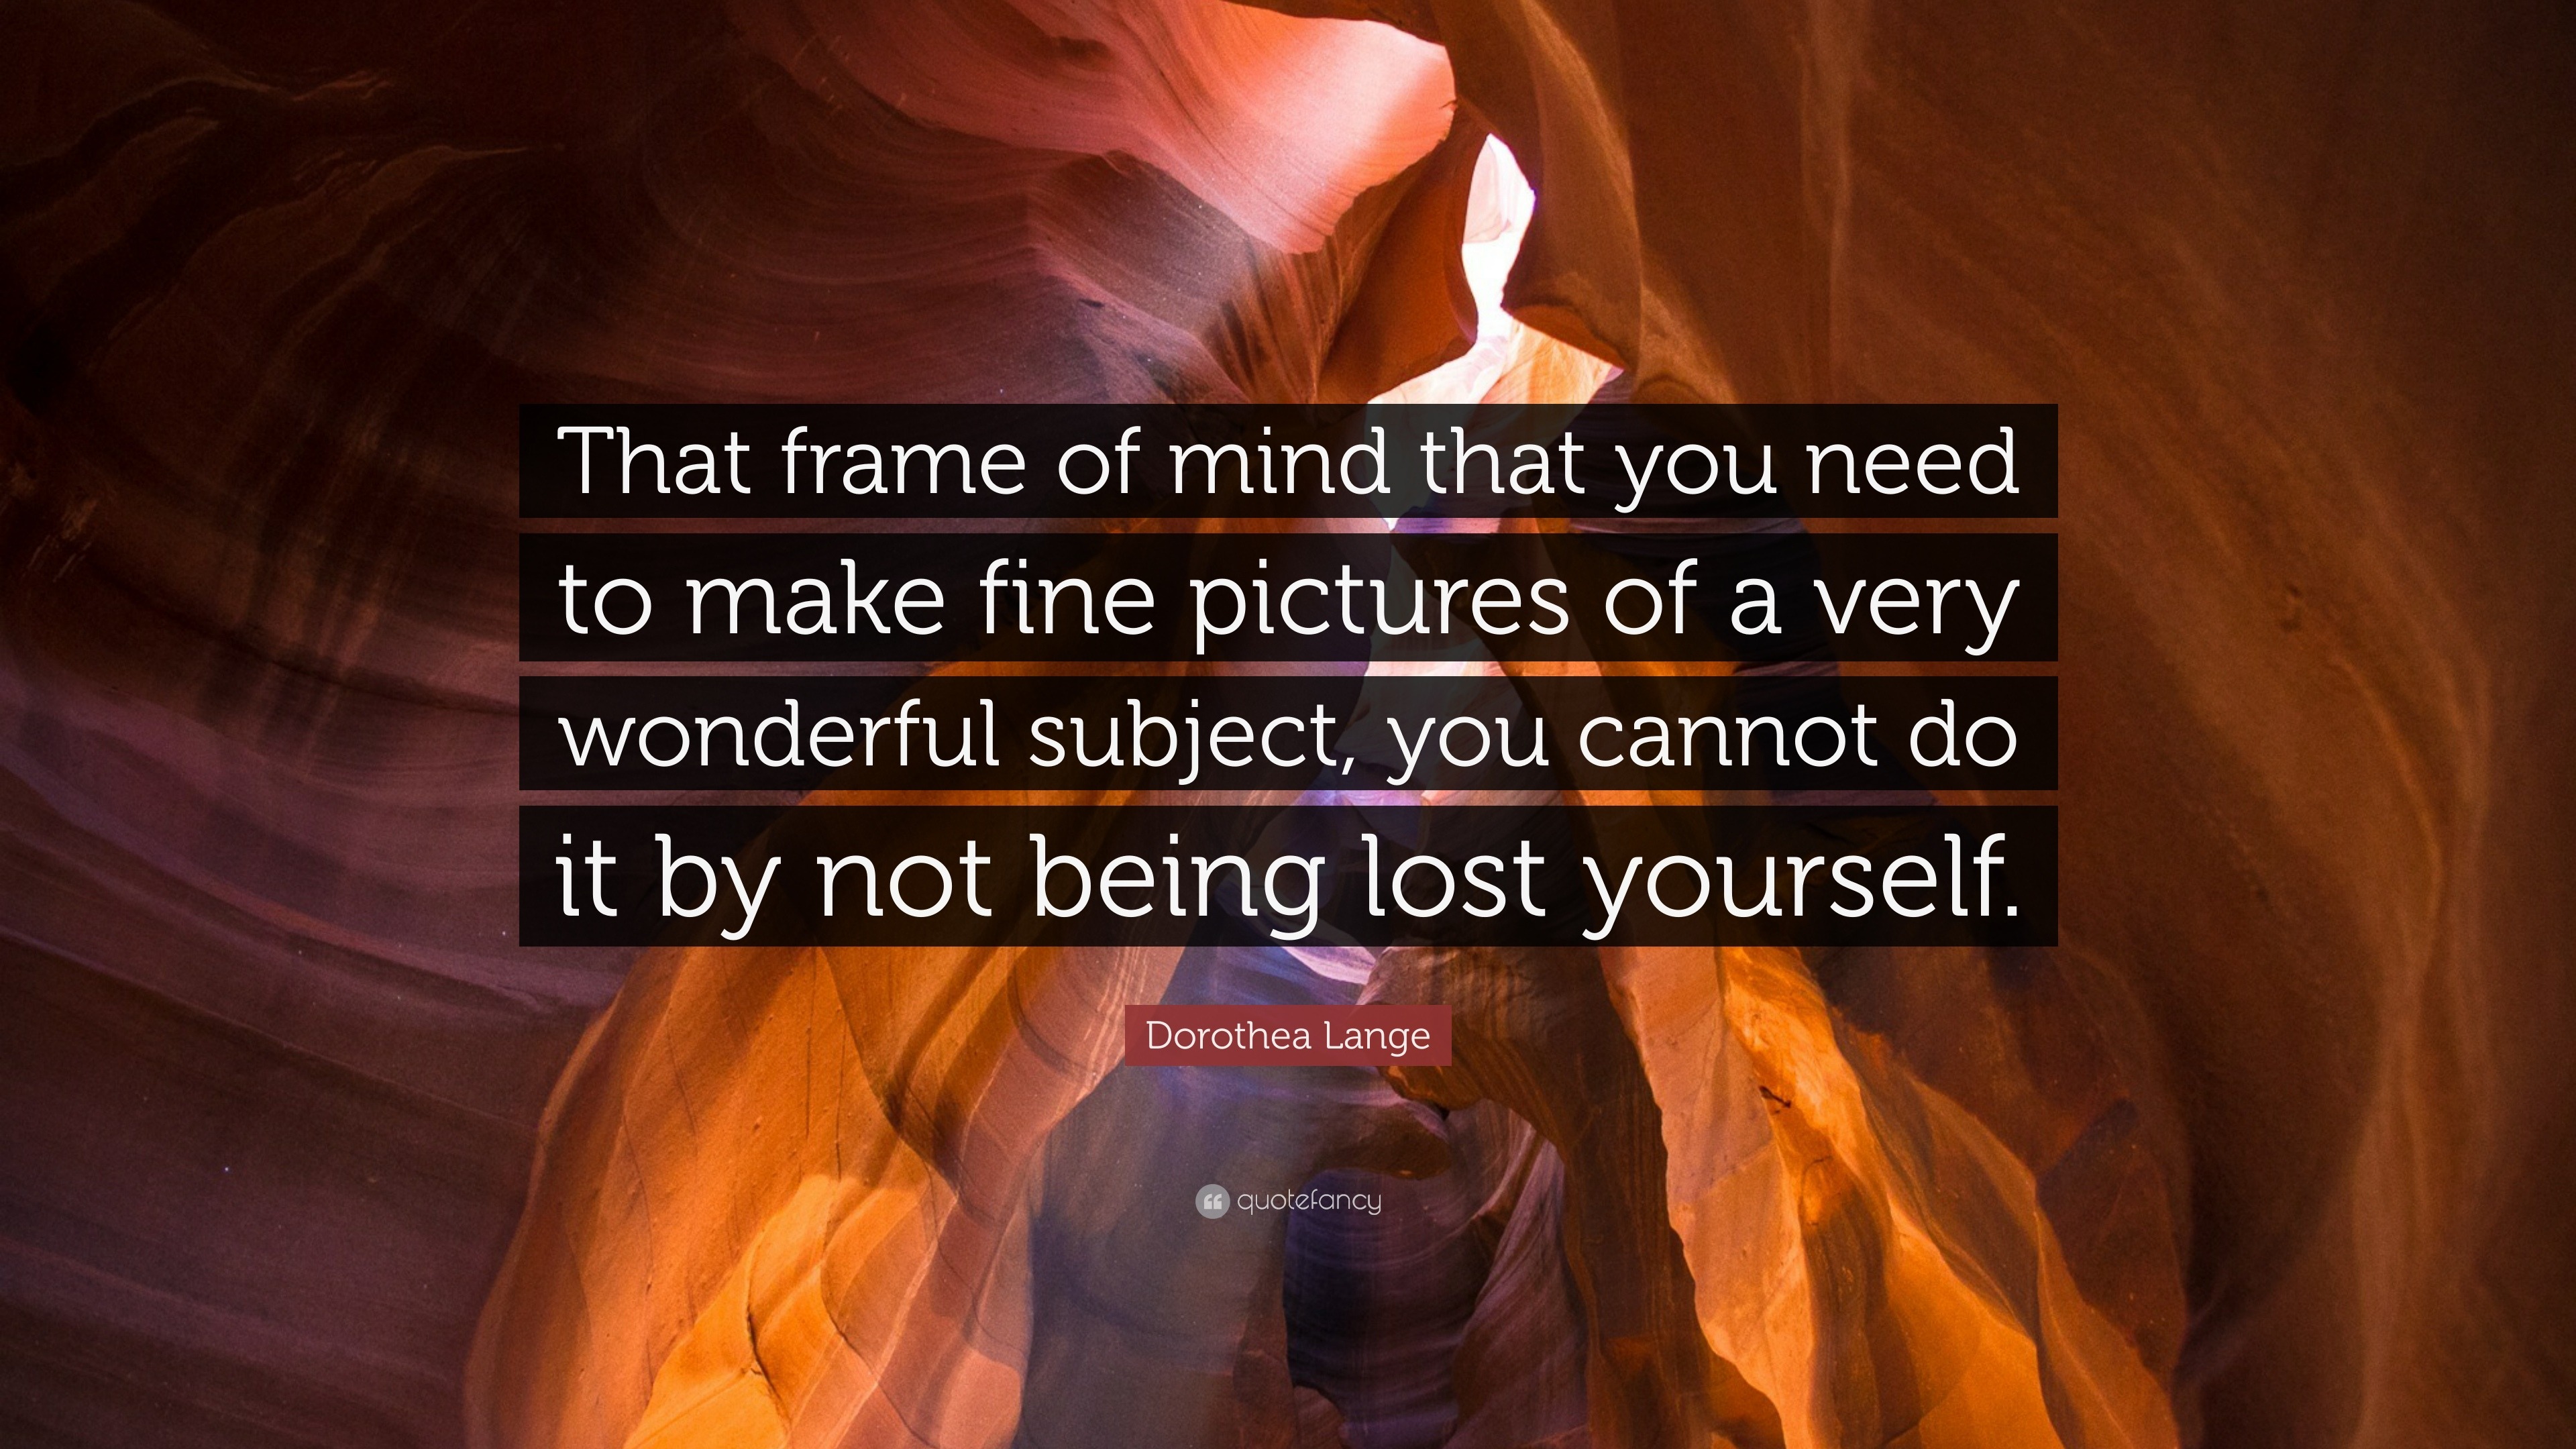 Dorothea Lange Quote: “That frame of mind that you need to make fine ...